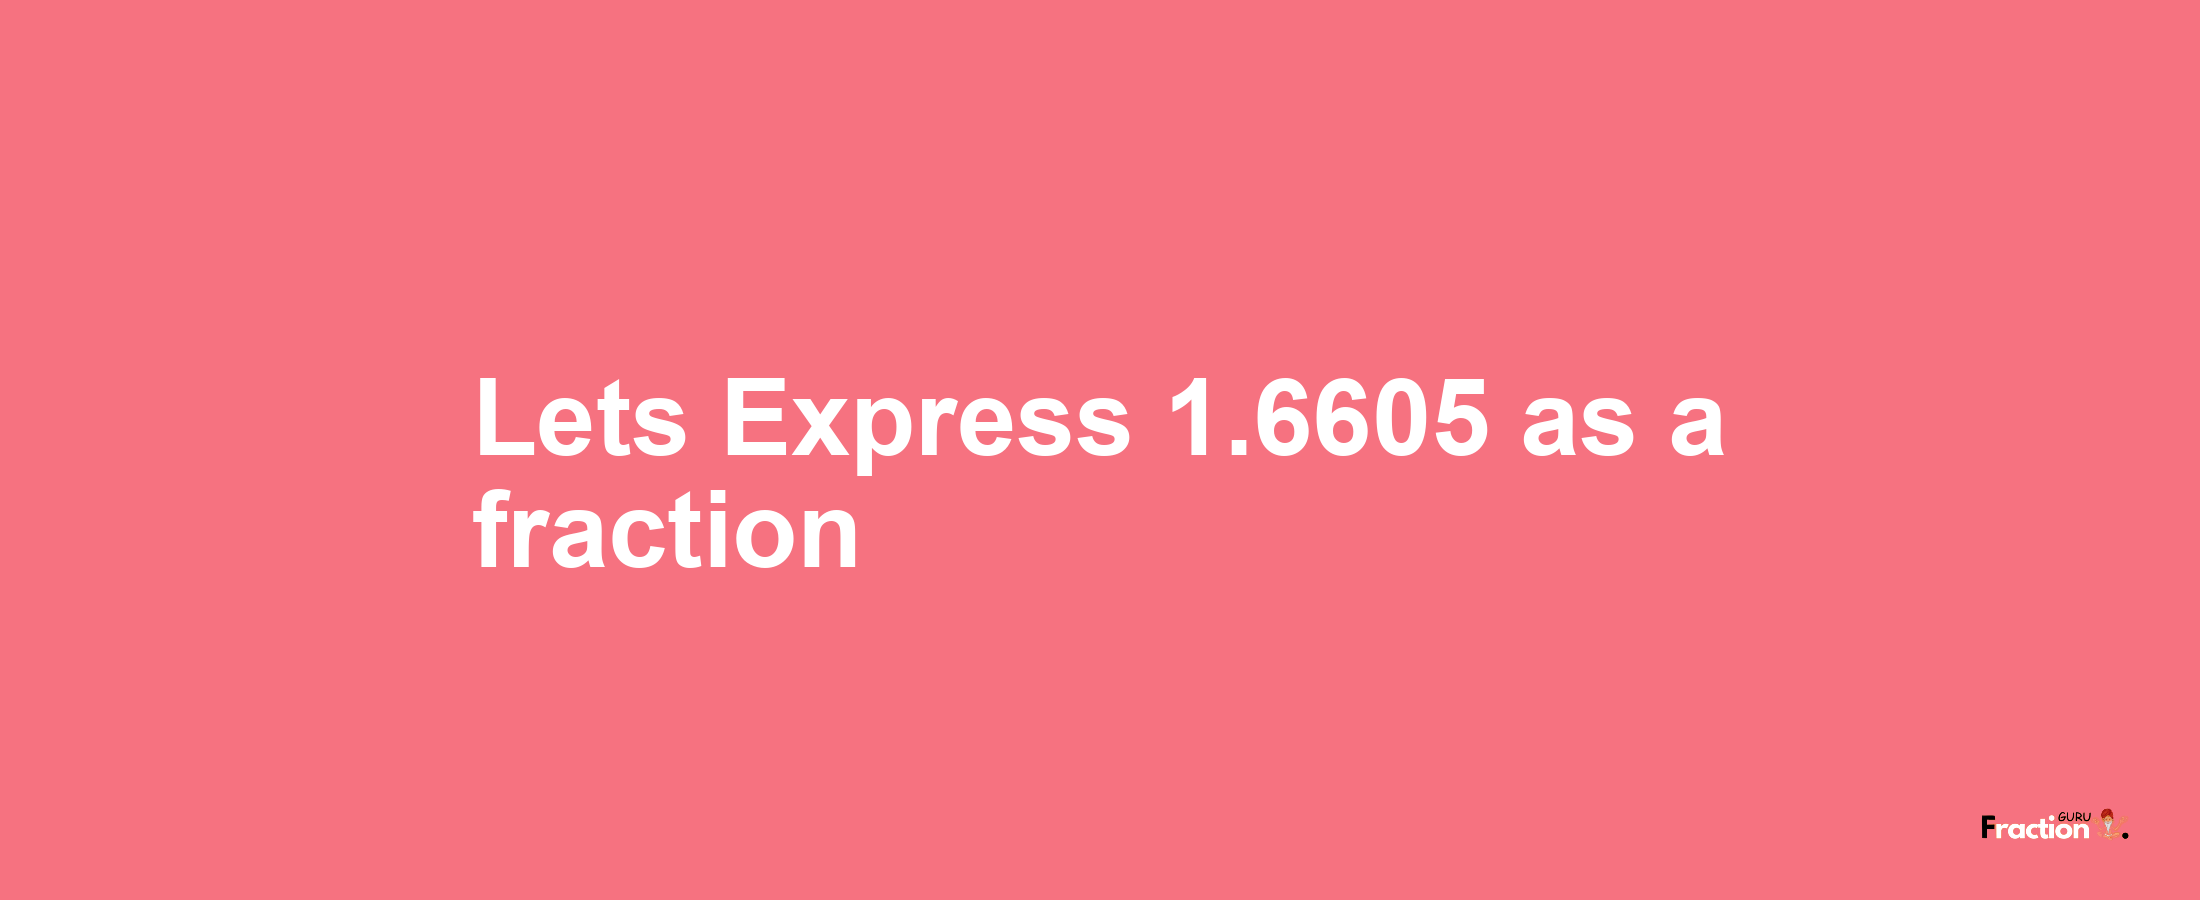 Lets Express 1.6605 as afraction